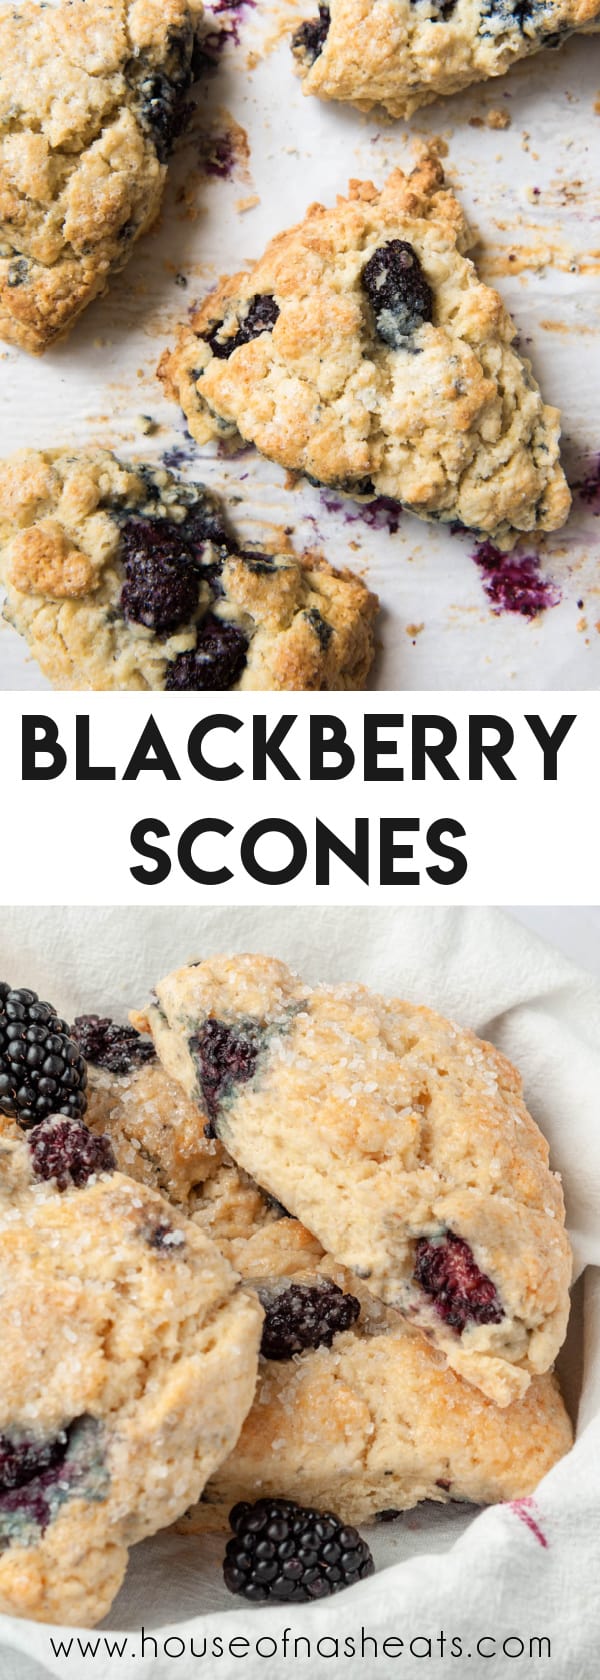 A collage of blackberry scones with text overlay.